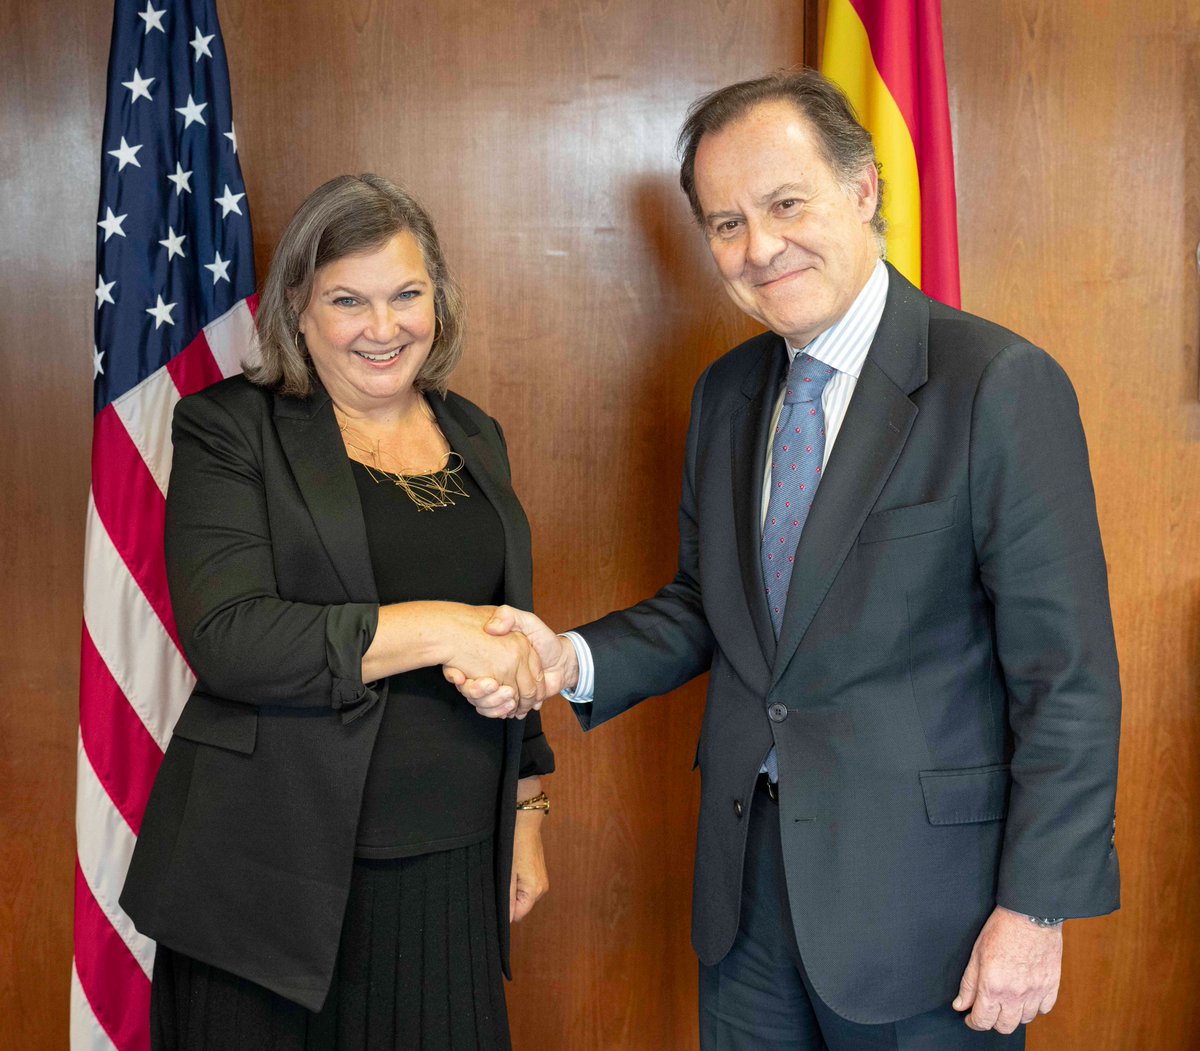 Important conversation with Spanish Political Director Guillermo Ardizone from @SpainMFA. The 🇺🇸 and 🇪🇸continue to work together on our most critical challenges, including in the Middle East, Ukraine, and Haiti.